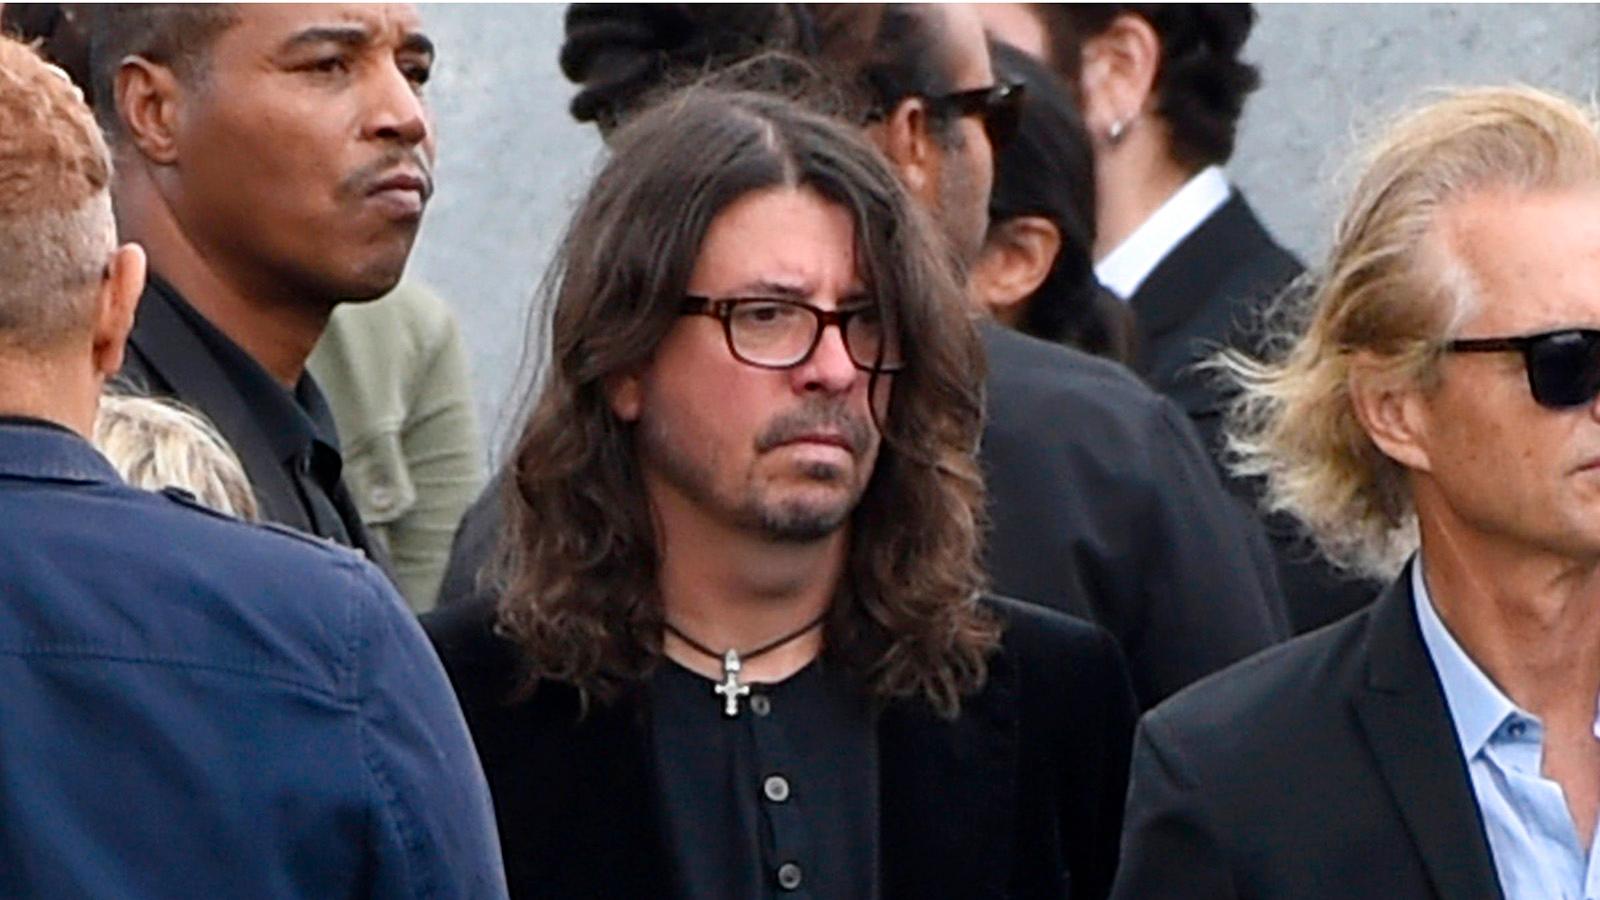 Foo Fighters frontman Dave Grohl.